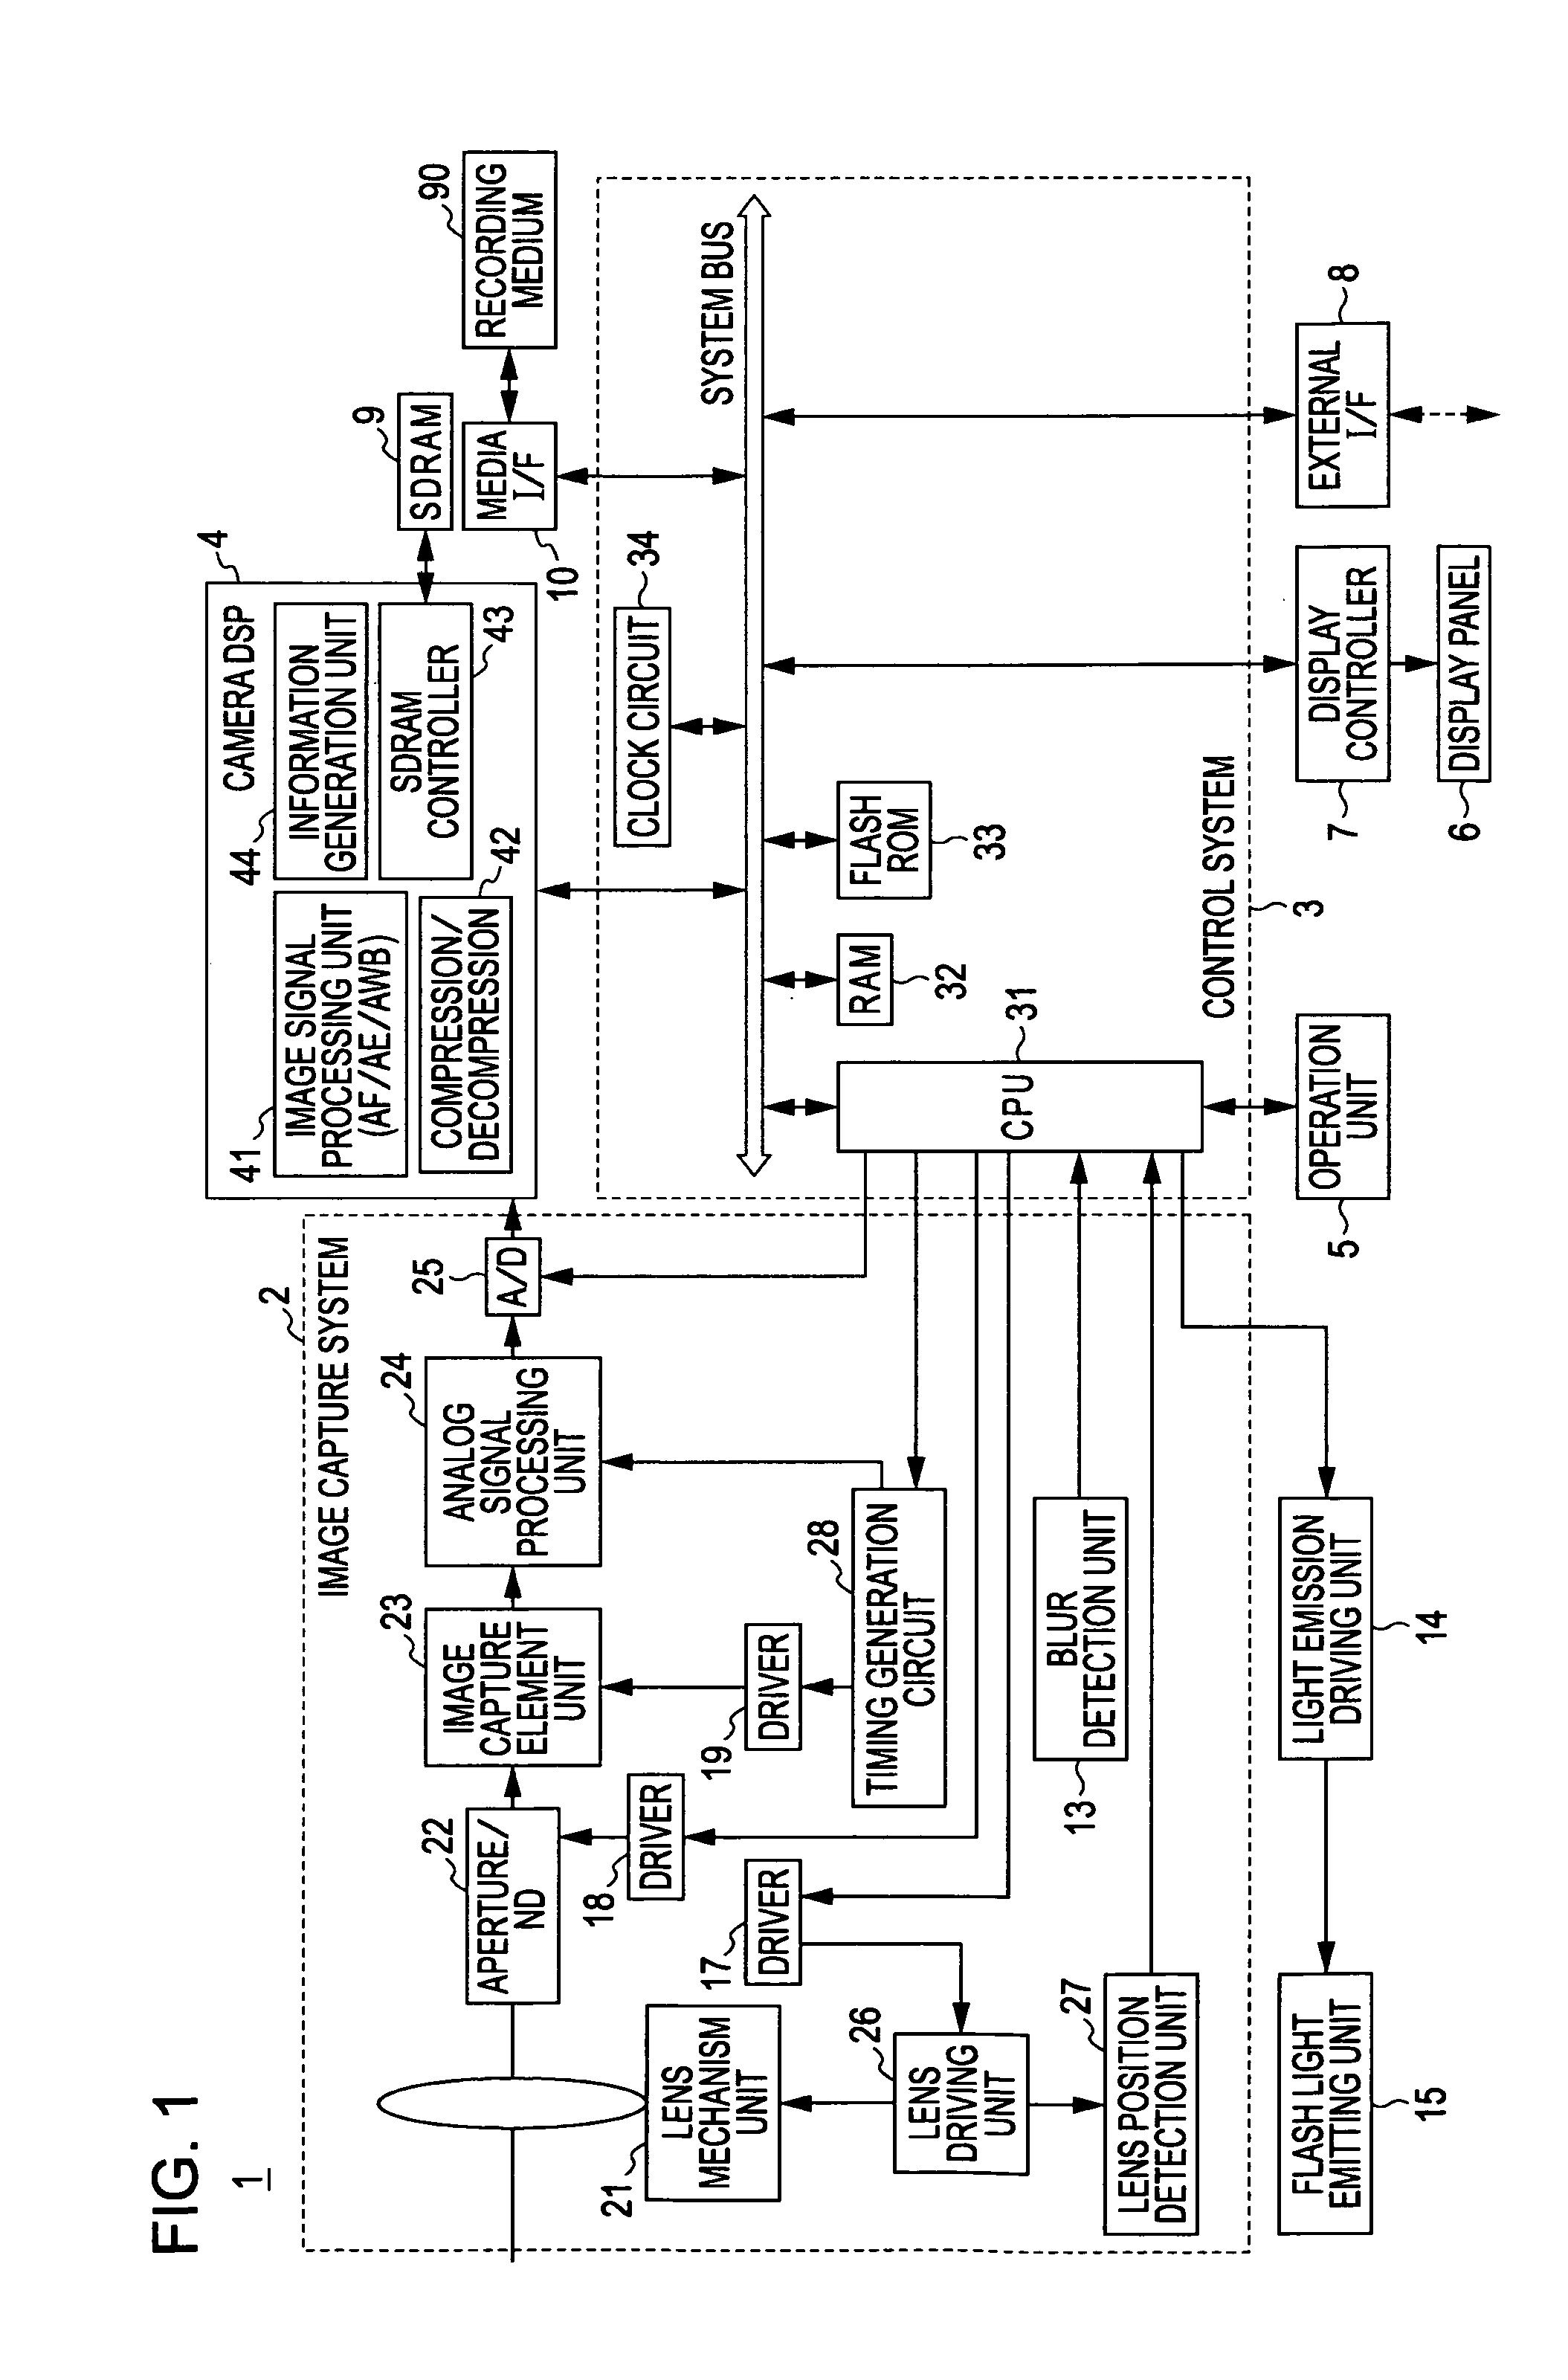 Image capture apparatus and method for generating combined-image data